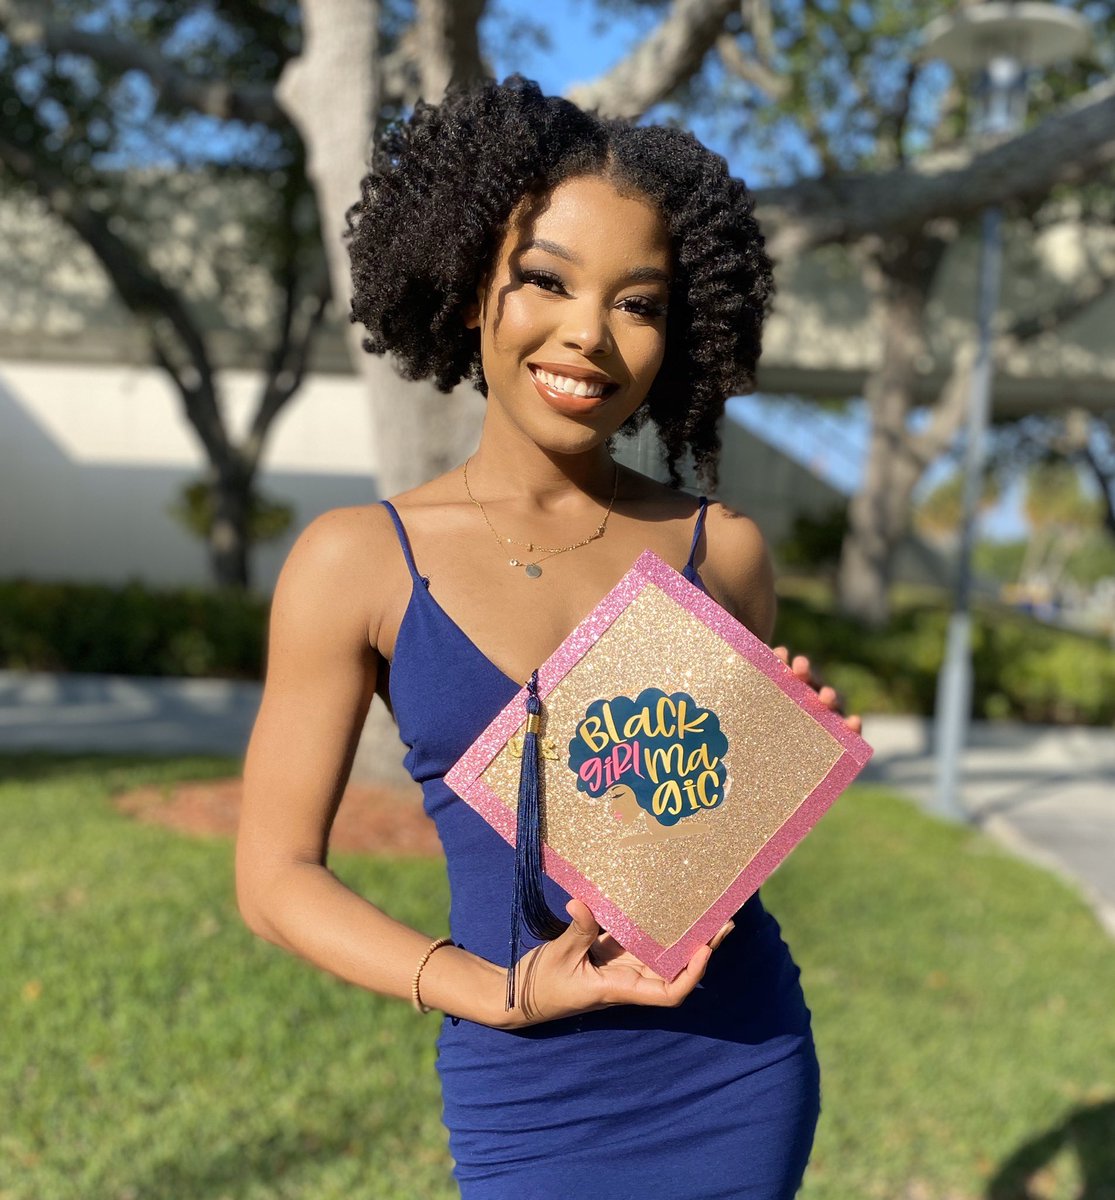 Three internships and a whole bunch of studying later & I’ve graduated DEBT-FREE with a Bachelors of Science & Certificate while running my own company at 22. 🥳

God has blessed me with more than I could ever imagine and I can’t wait to see where he takes me next. 🎉

#FIU20 💙